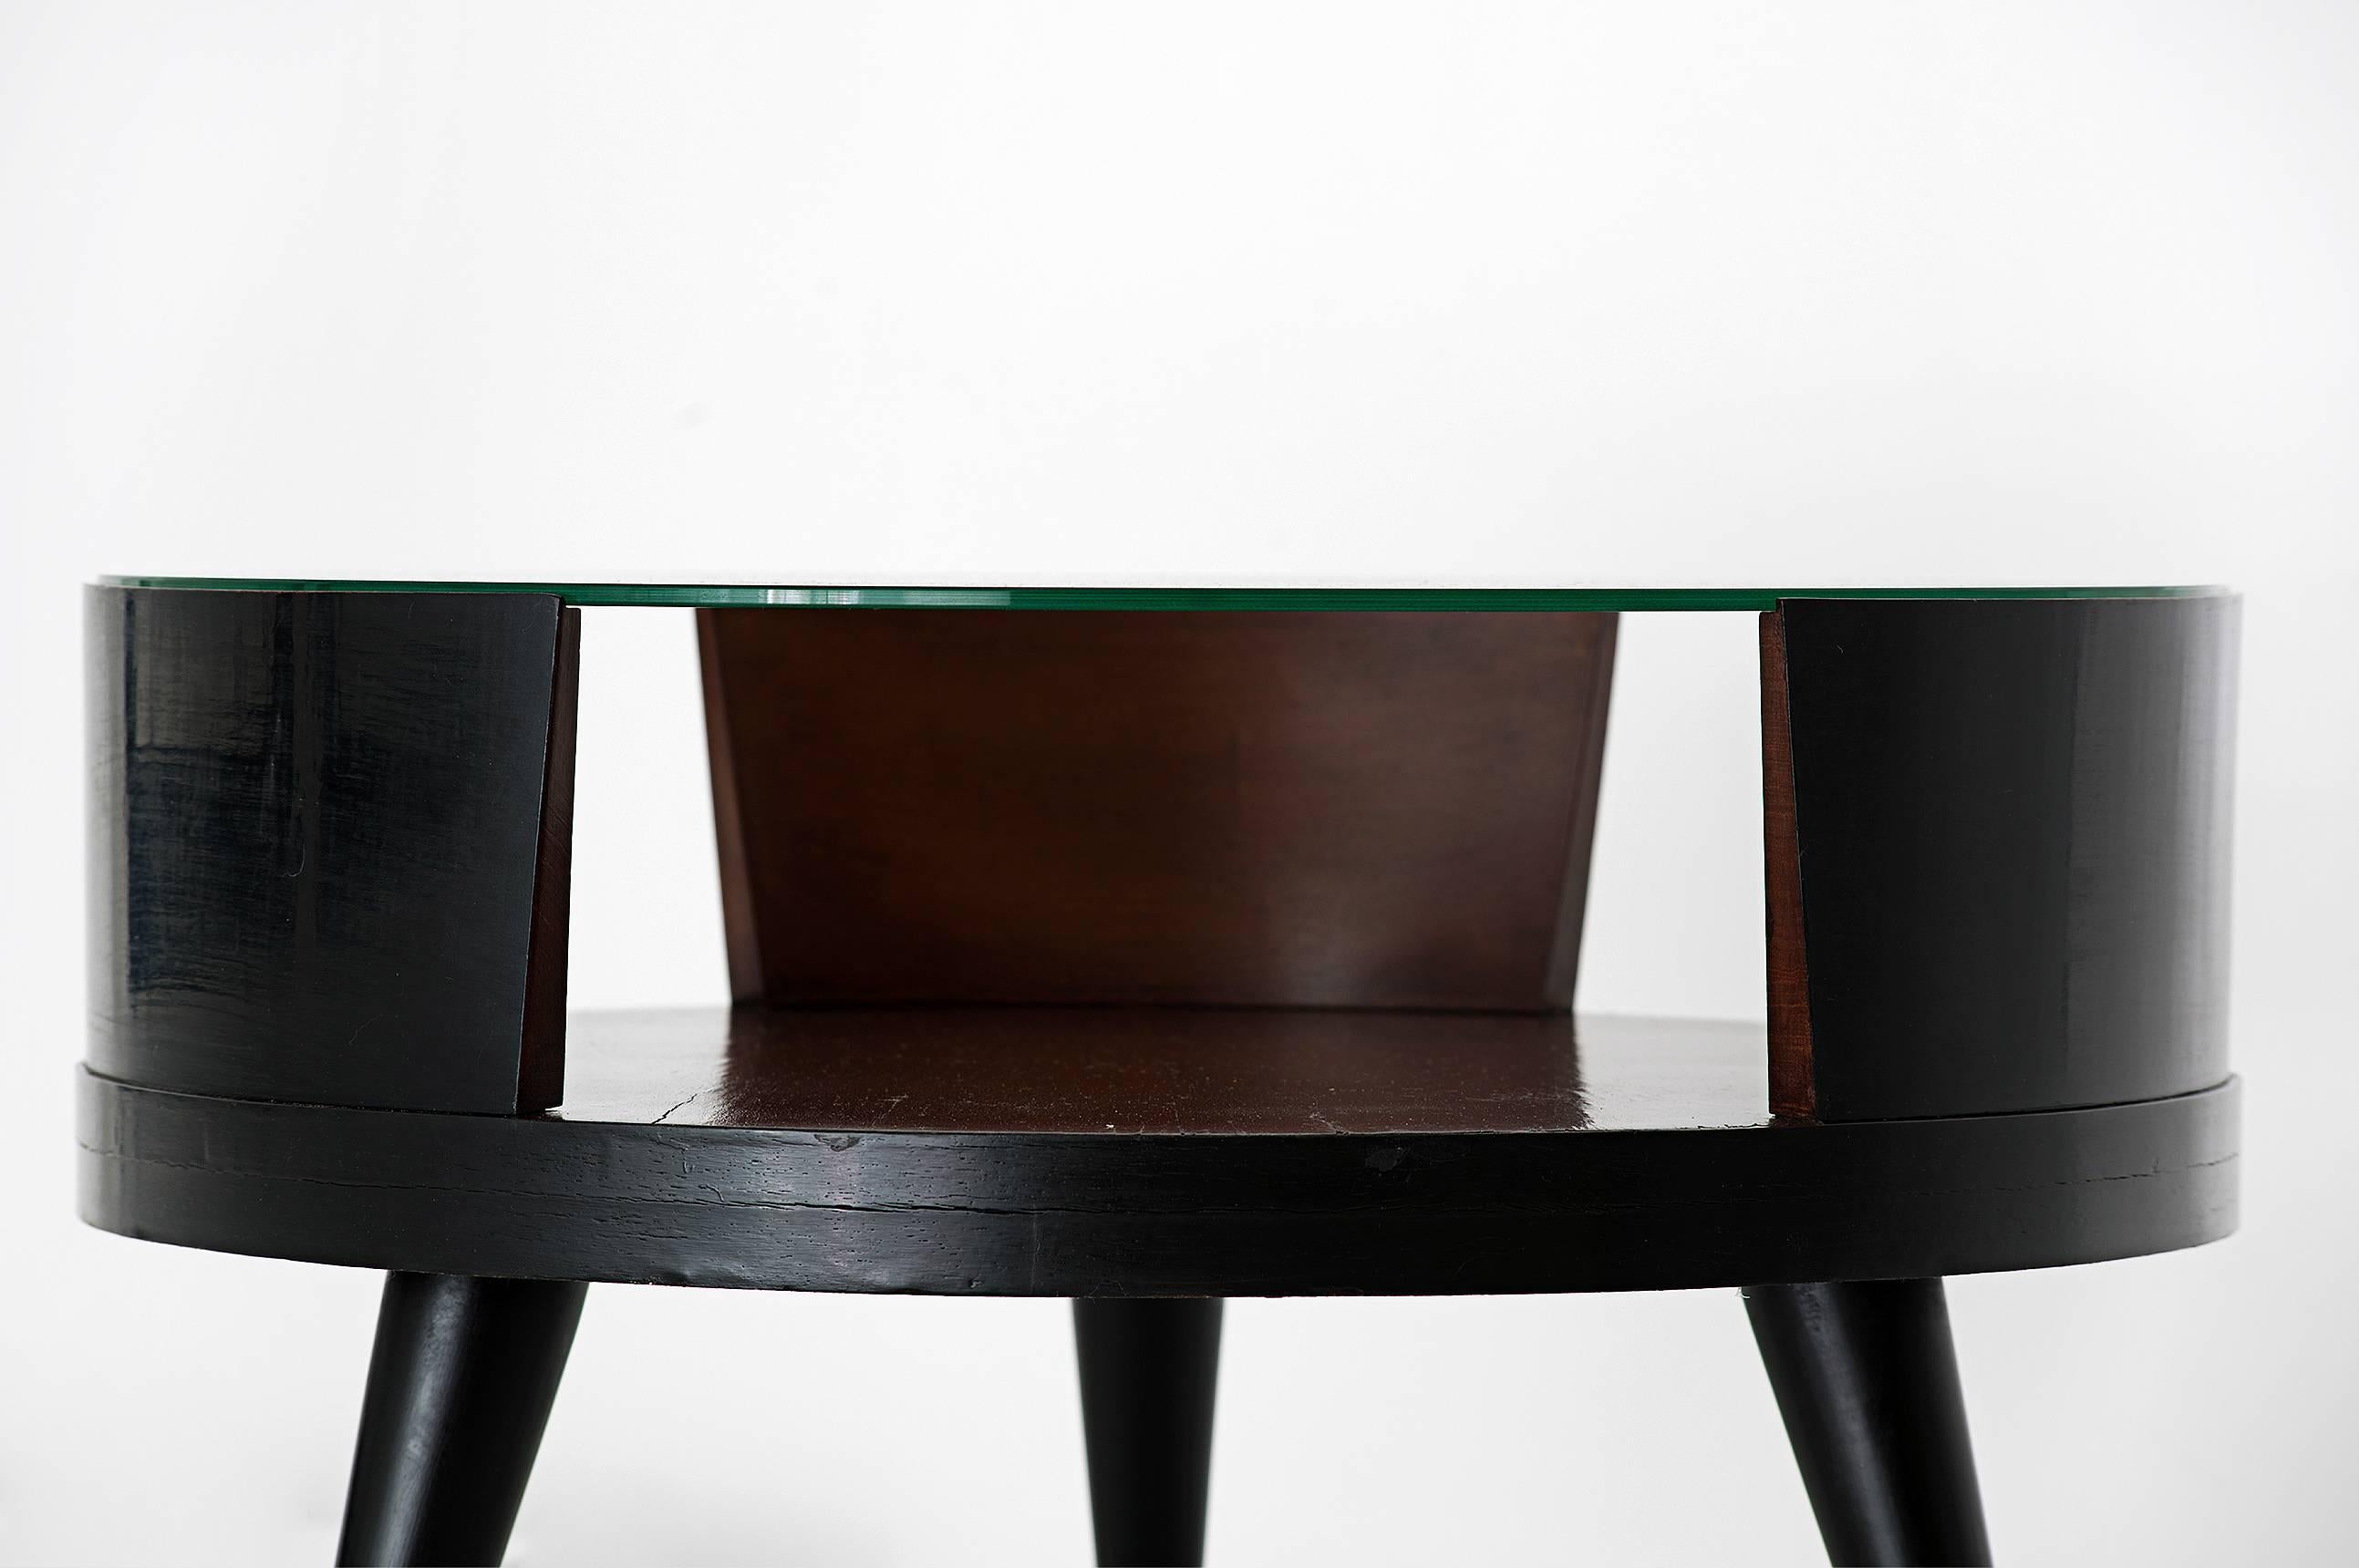 Martin Eisler (1913-1977) & Carlo Hauner (1927-1997)

Coffee table
Manufactured by Forma Moveis
Brazil, 1950s
Ebonized wood, glass top
Midcentury design Brazilian coffee table. 

Measurements
60 cm diameter x 49 height cm.
23.50 in